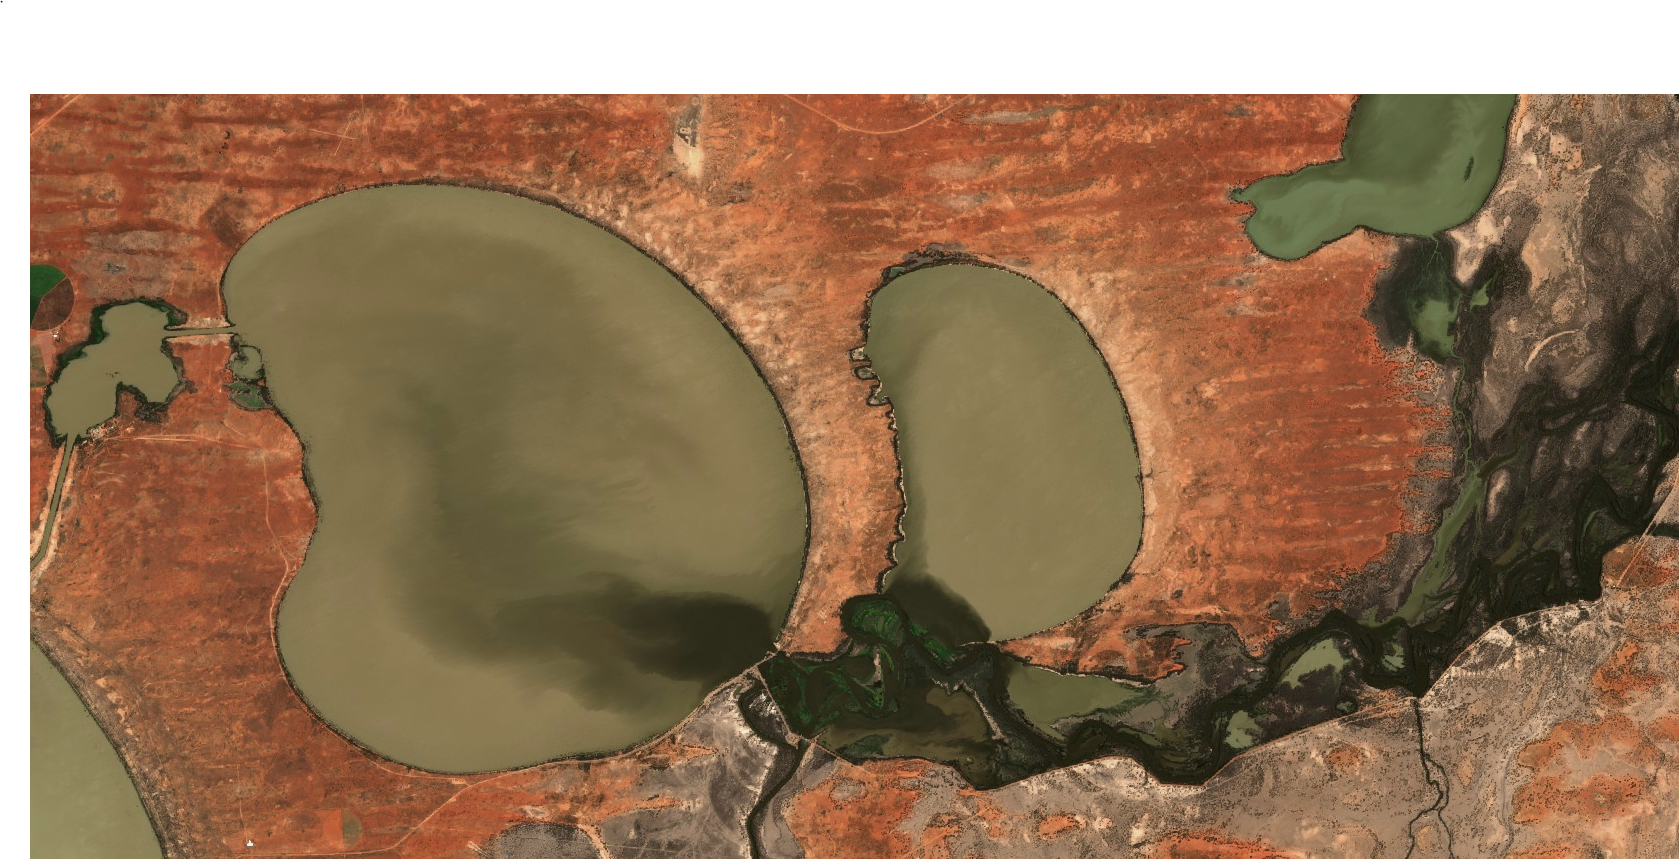 Hypoxic Blackwater spills into Menindee Lakes as High Floodwaters continue to flow down the Barwon-Darling River (satellite image taken 10/02/2022). PICTURE: SENTINEL HUB